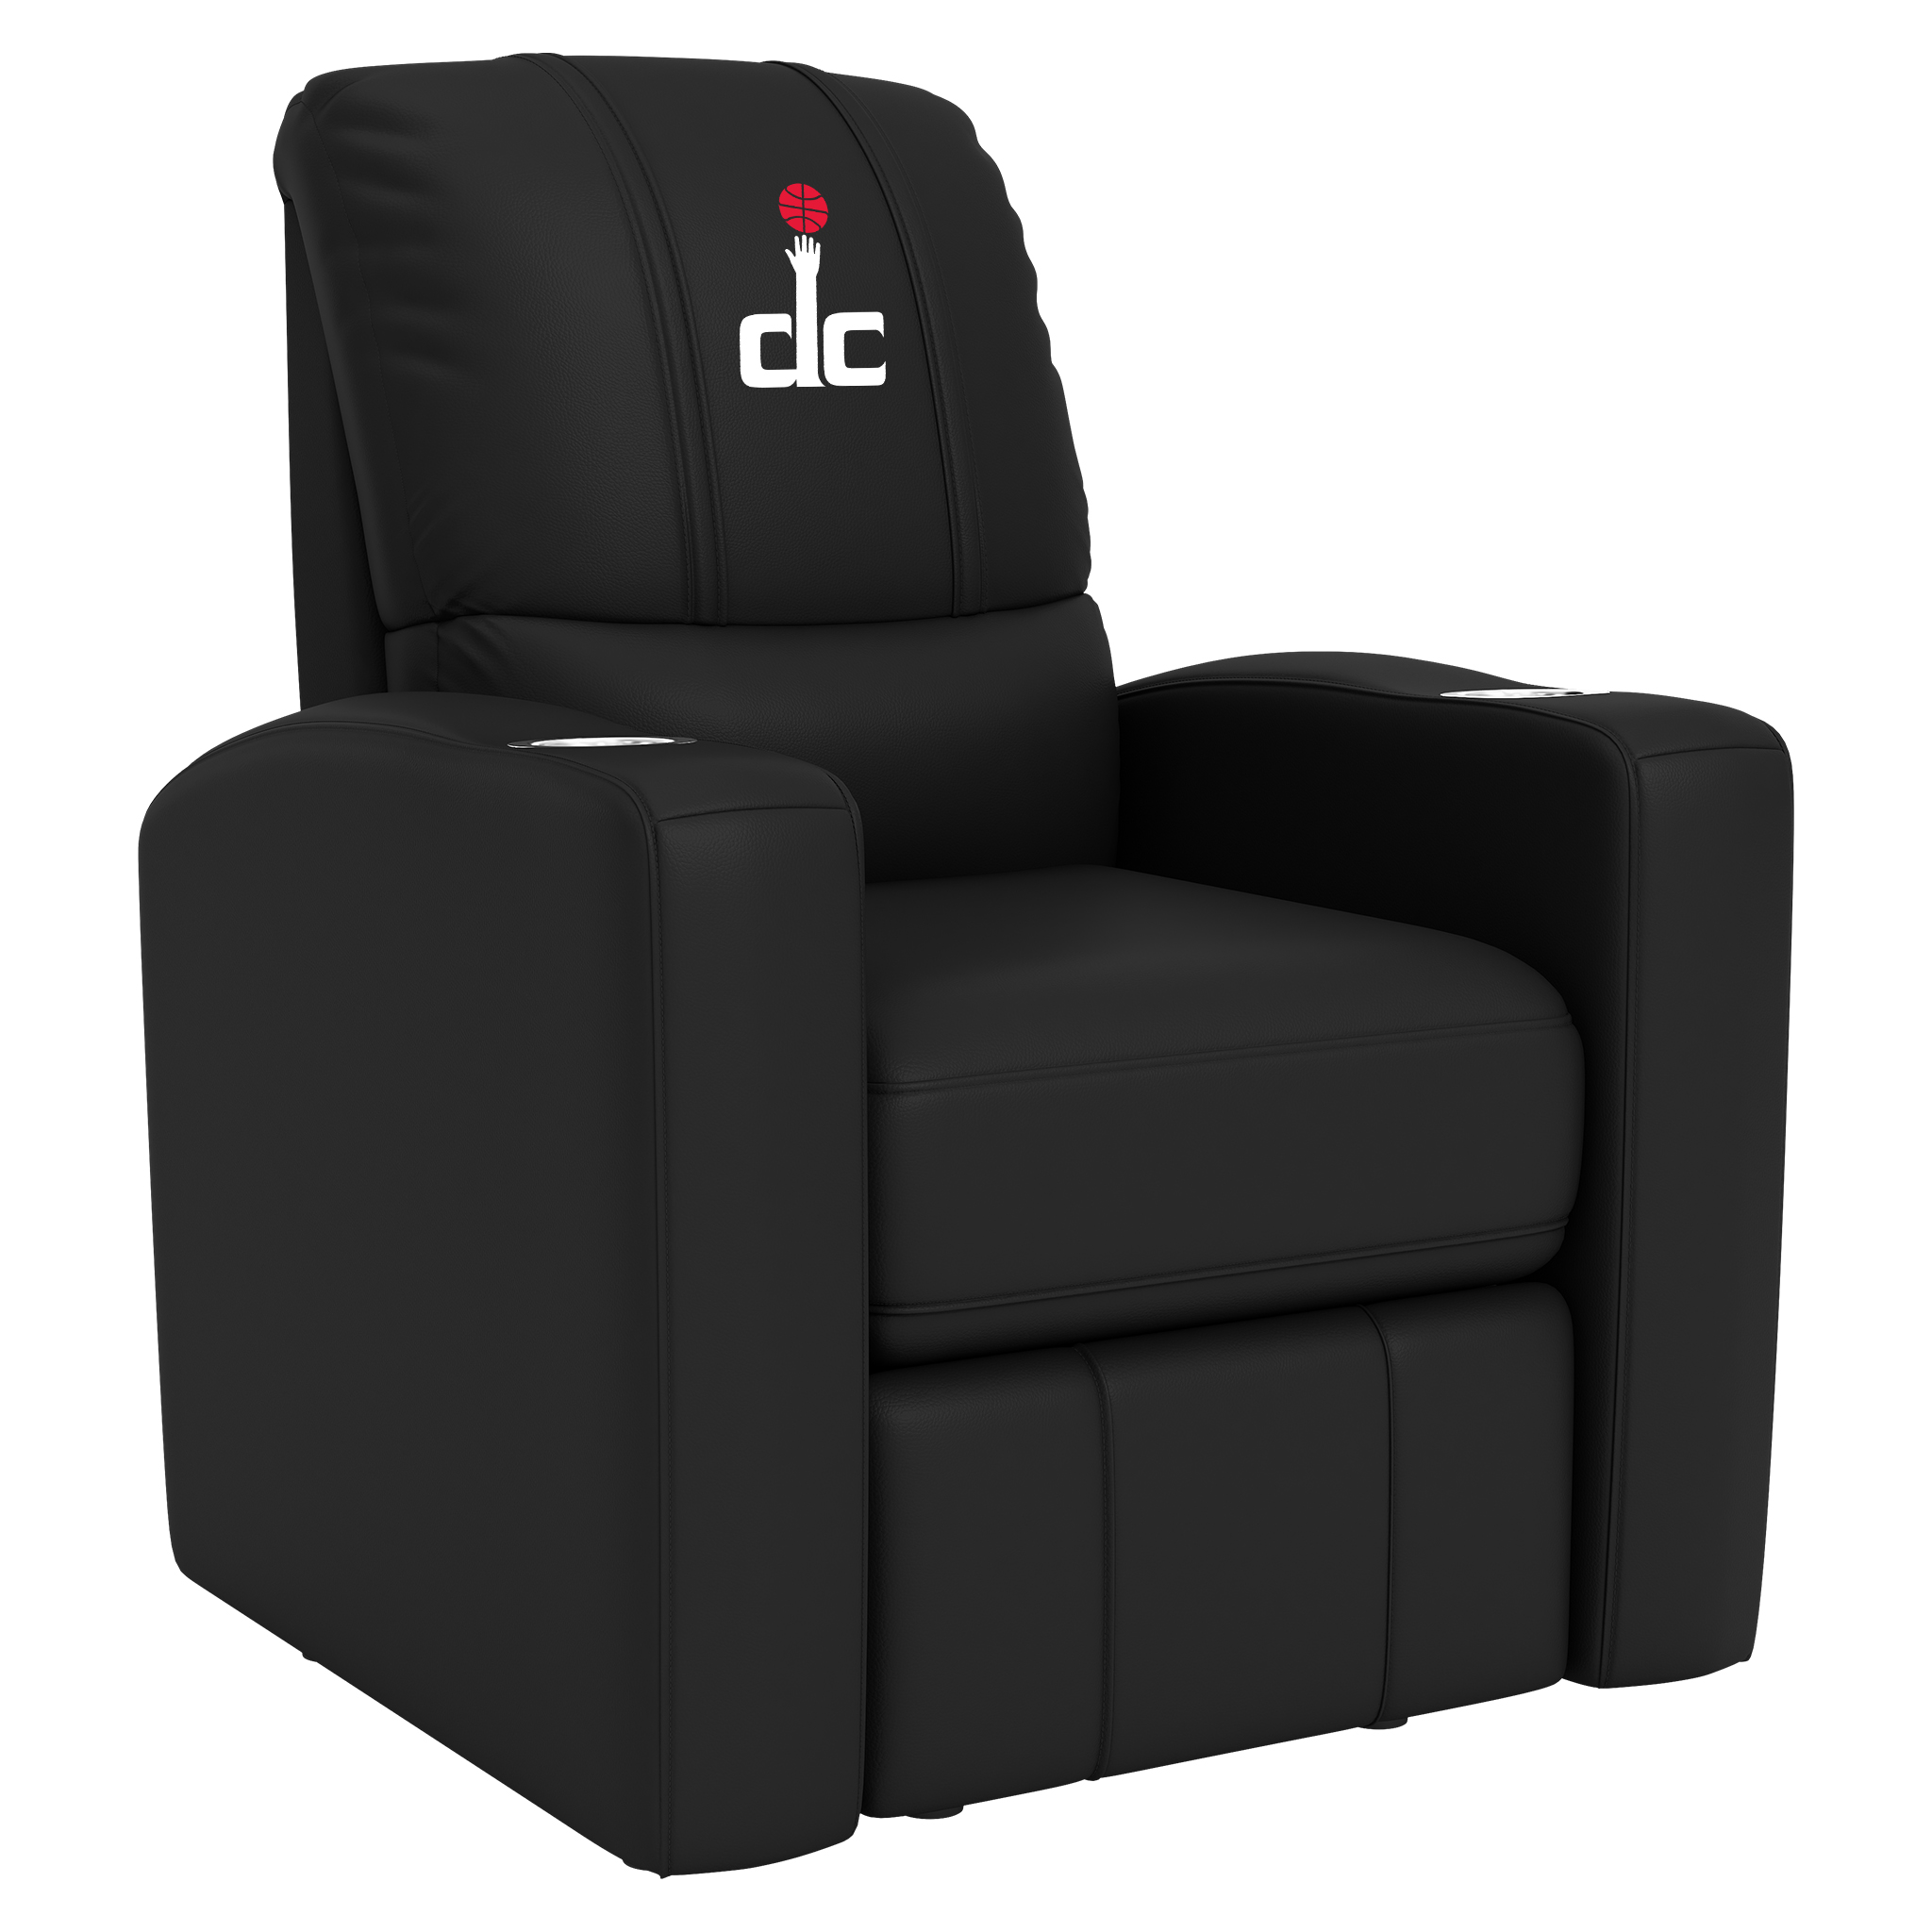 Washington Wizards Stealth Recliner with Washington Wizards Secondary